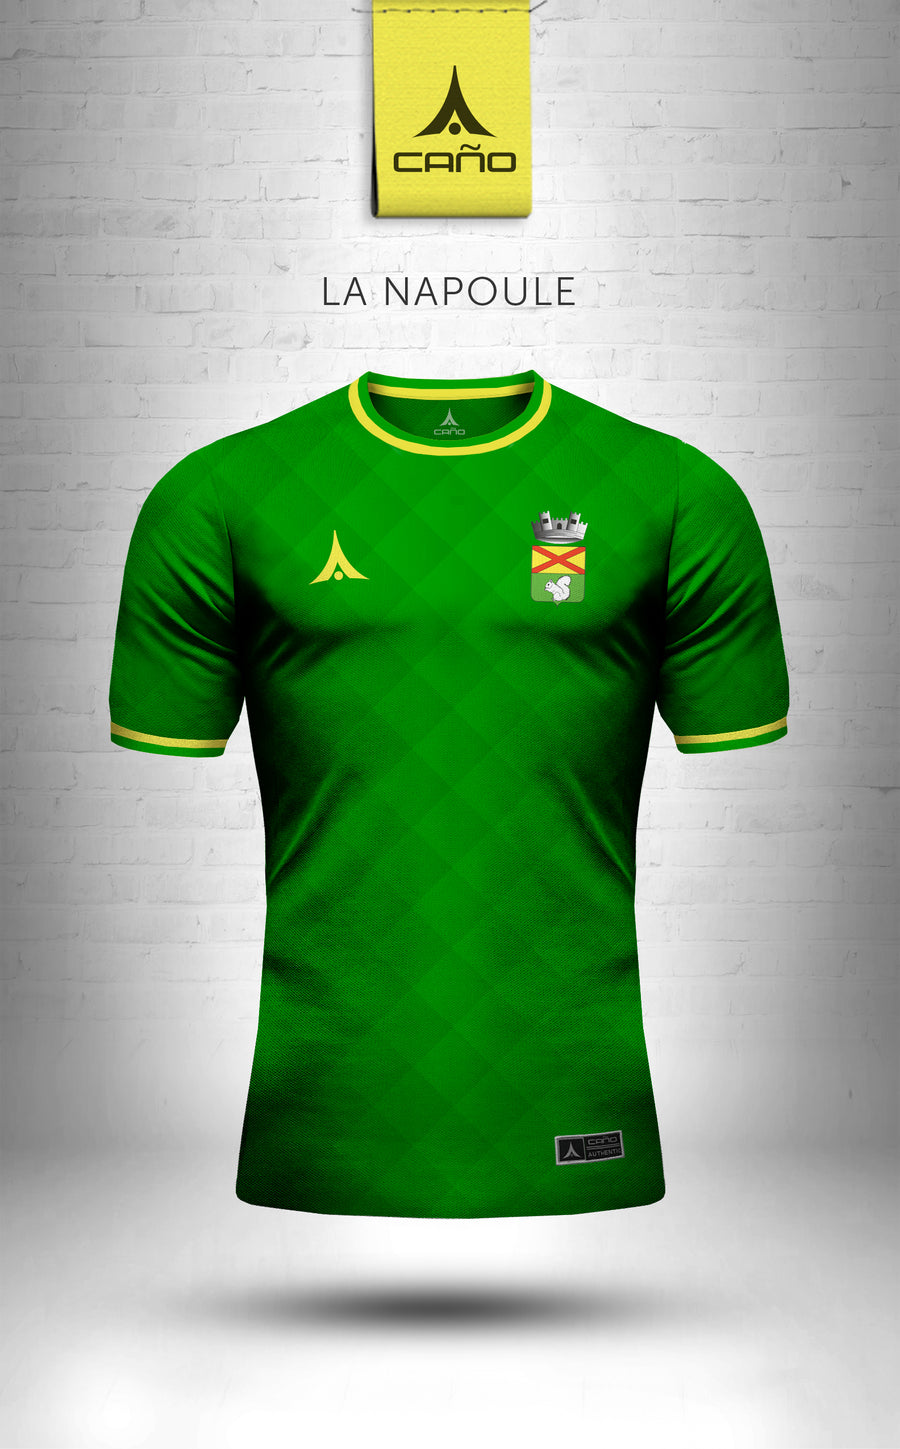 La Napoule in green/gold